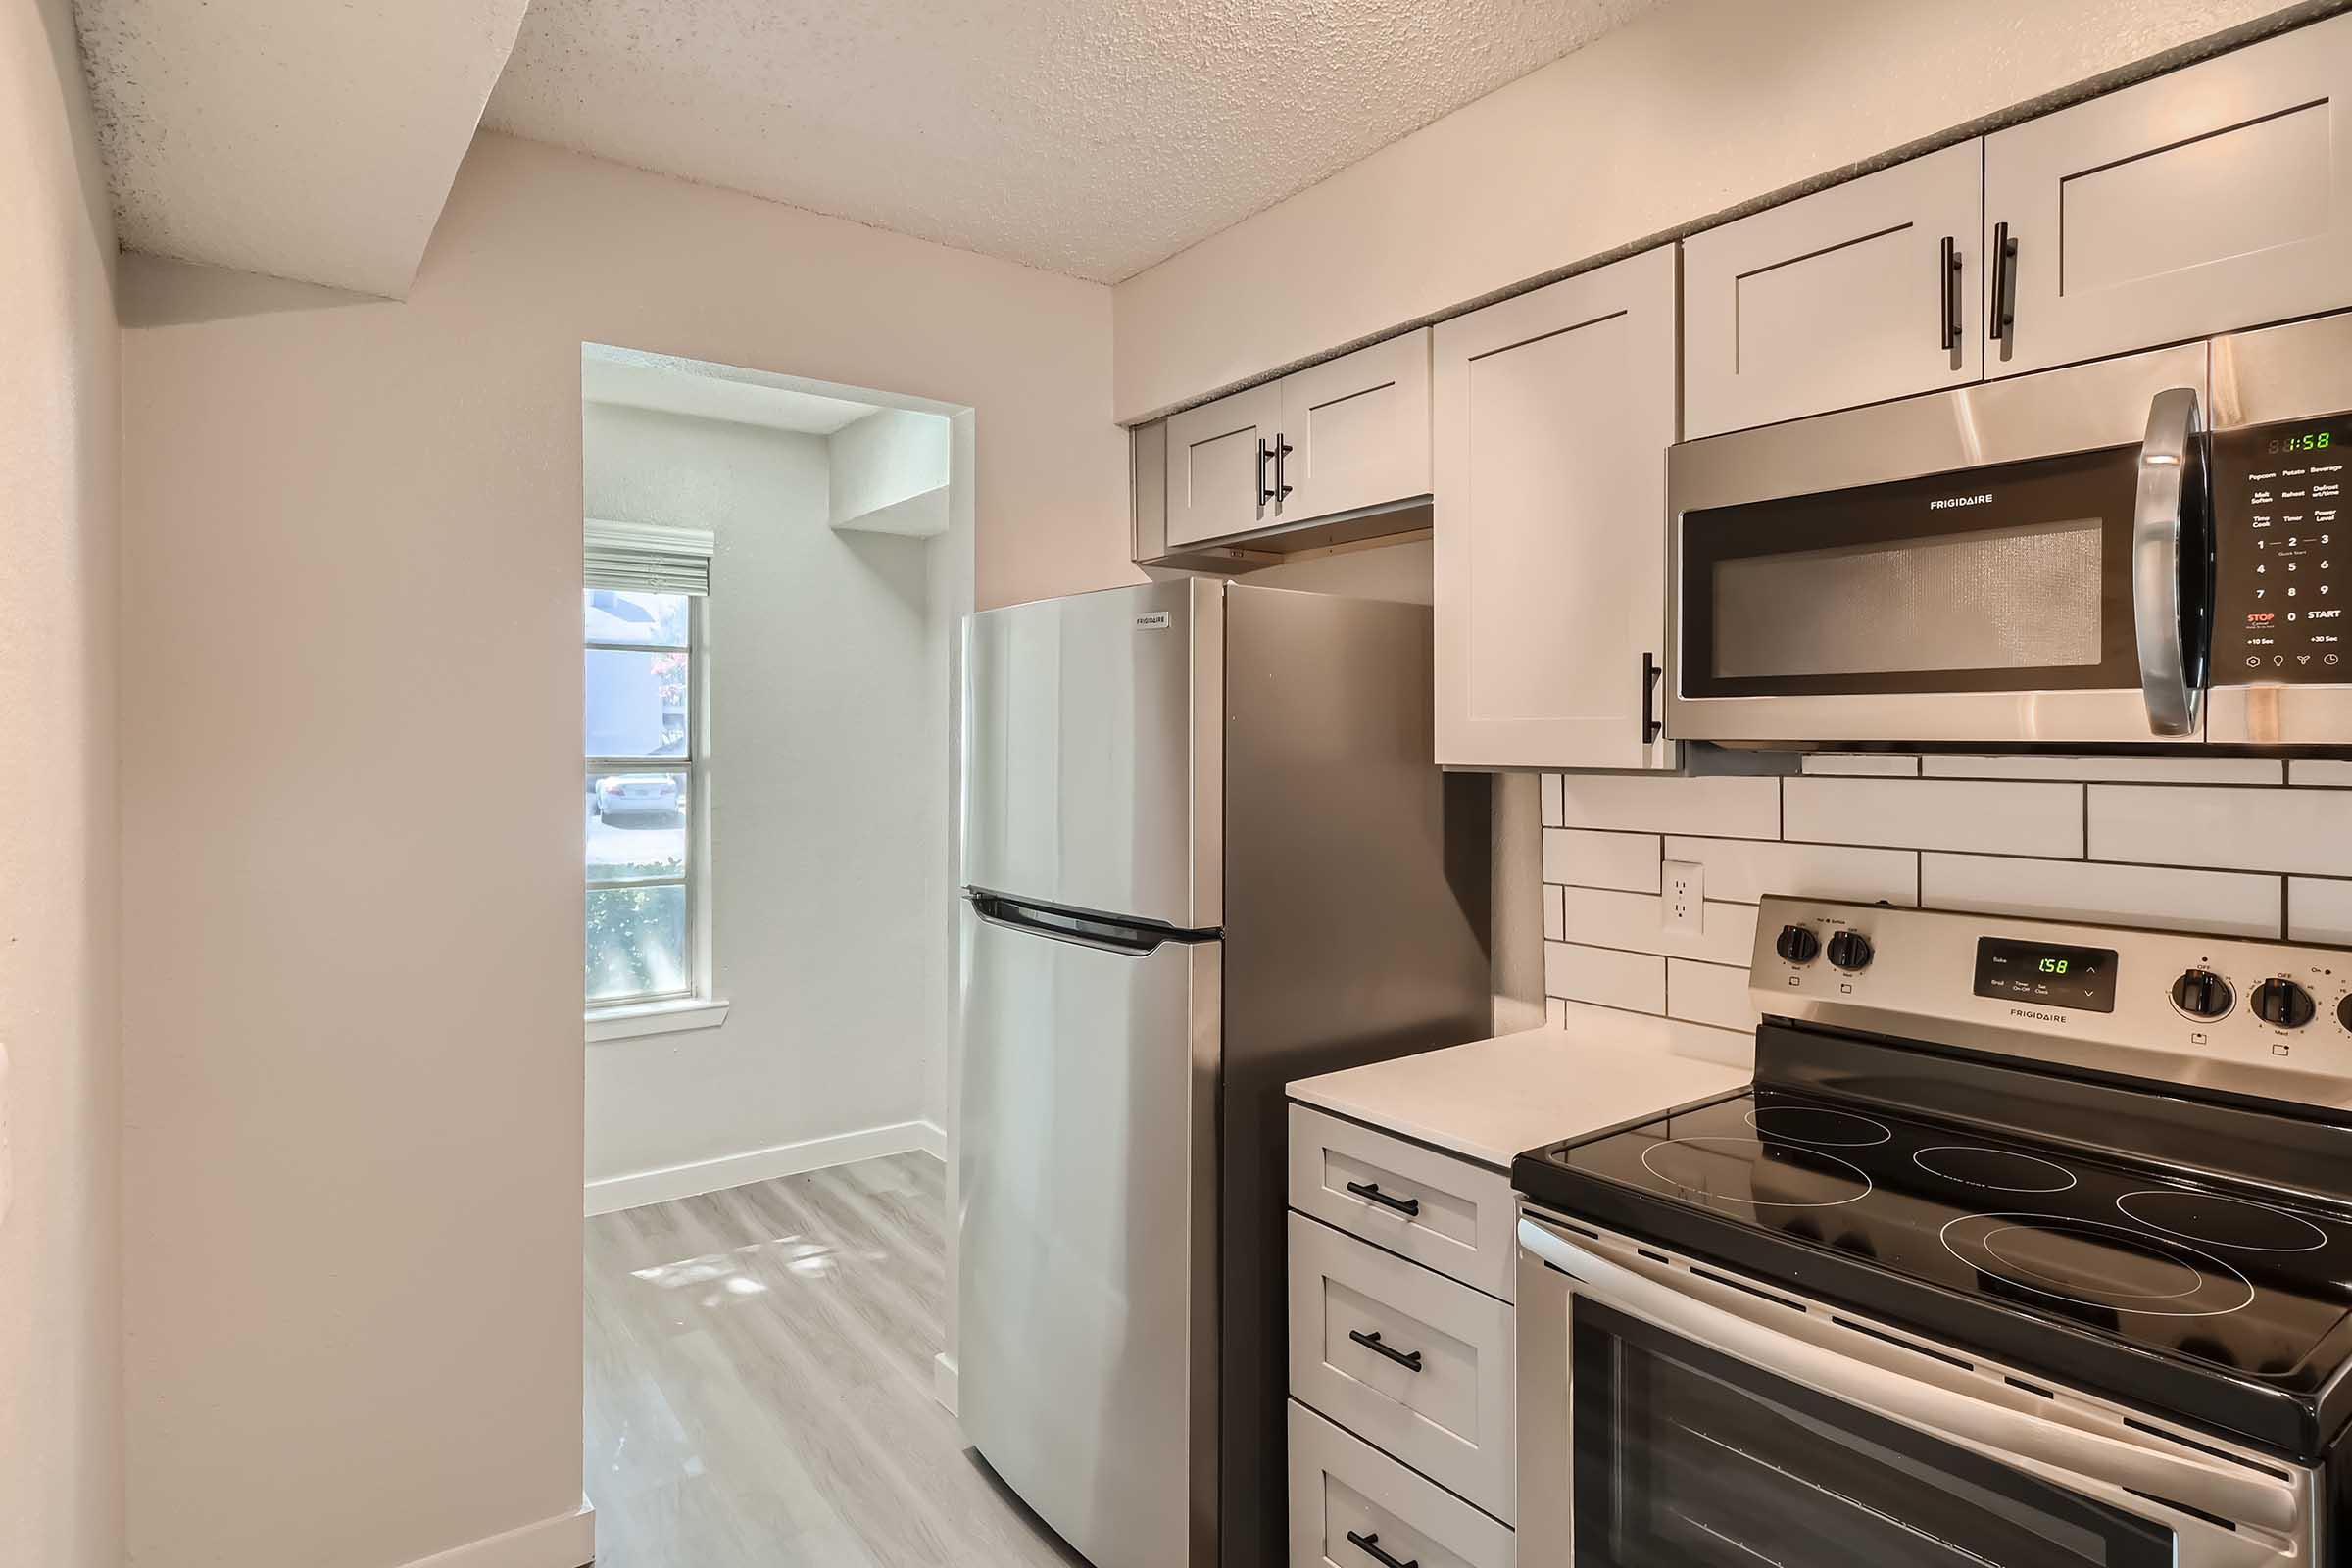 An apartment kitchen with stainless steel appliances and a view of the dining area at Rise North Arlington.